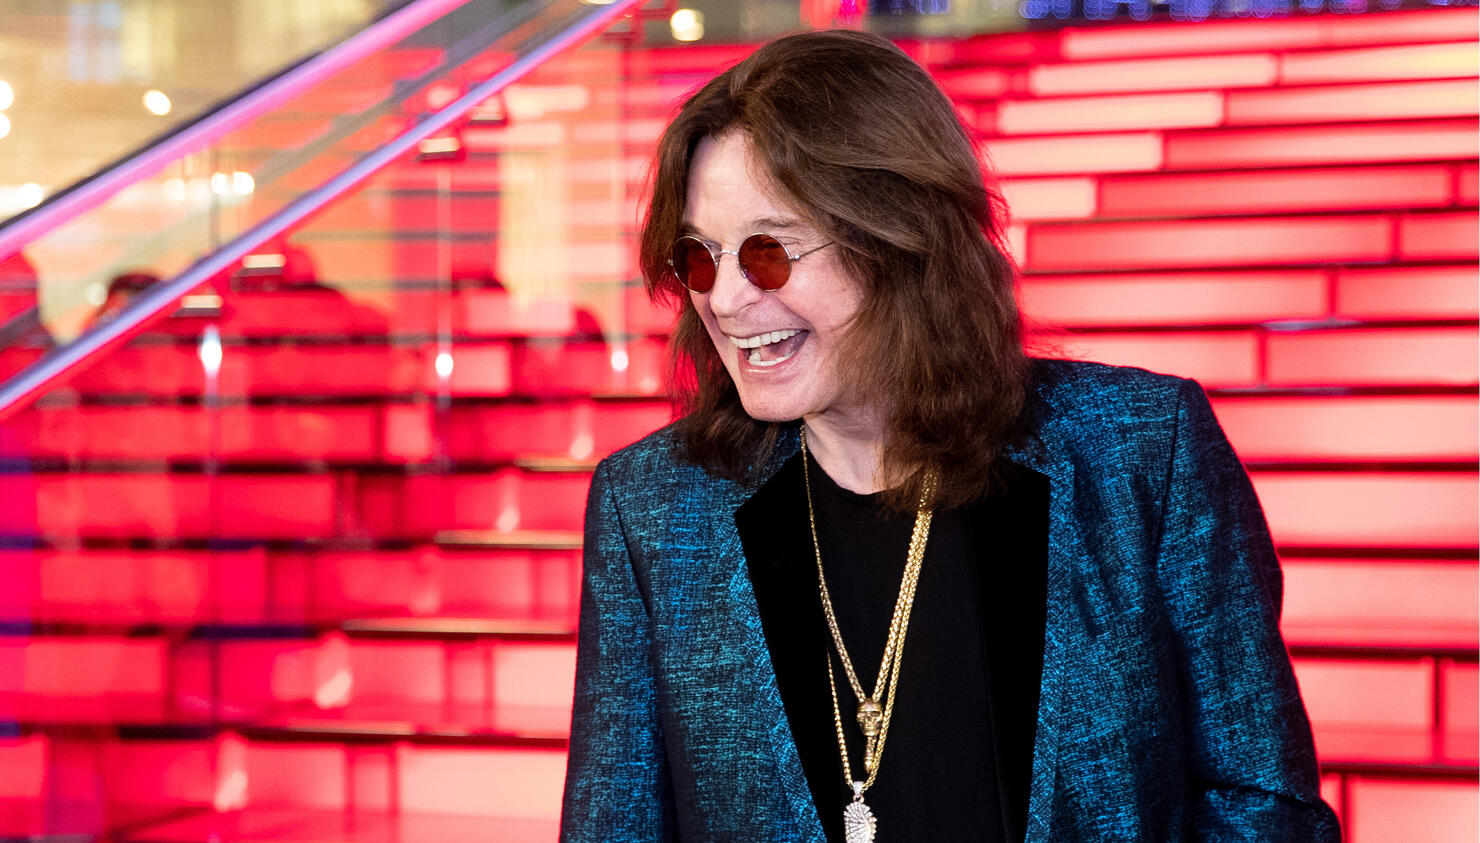 British musician Ozzy Osbourne signs star at Moscow Walk of Fame